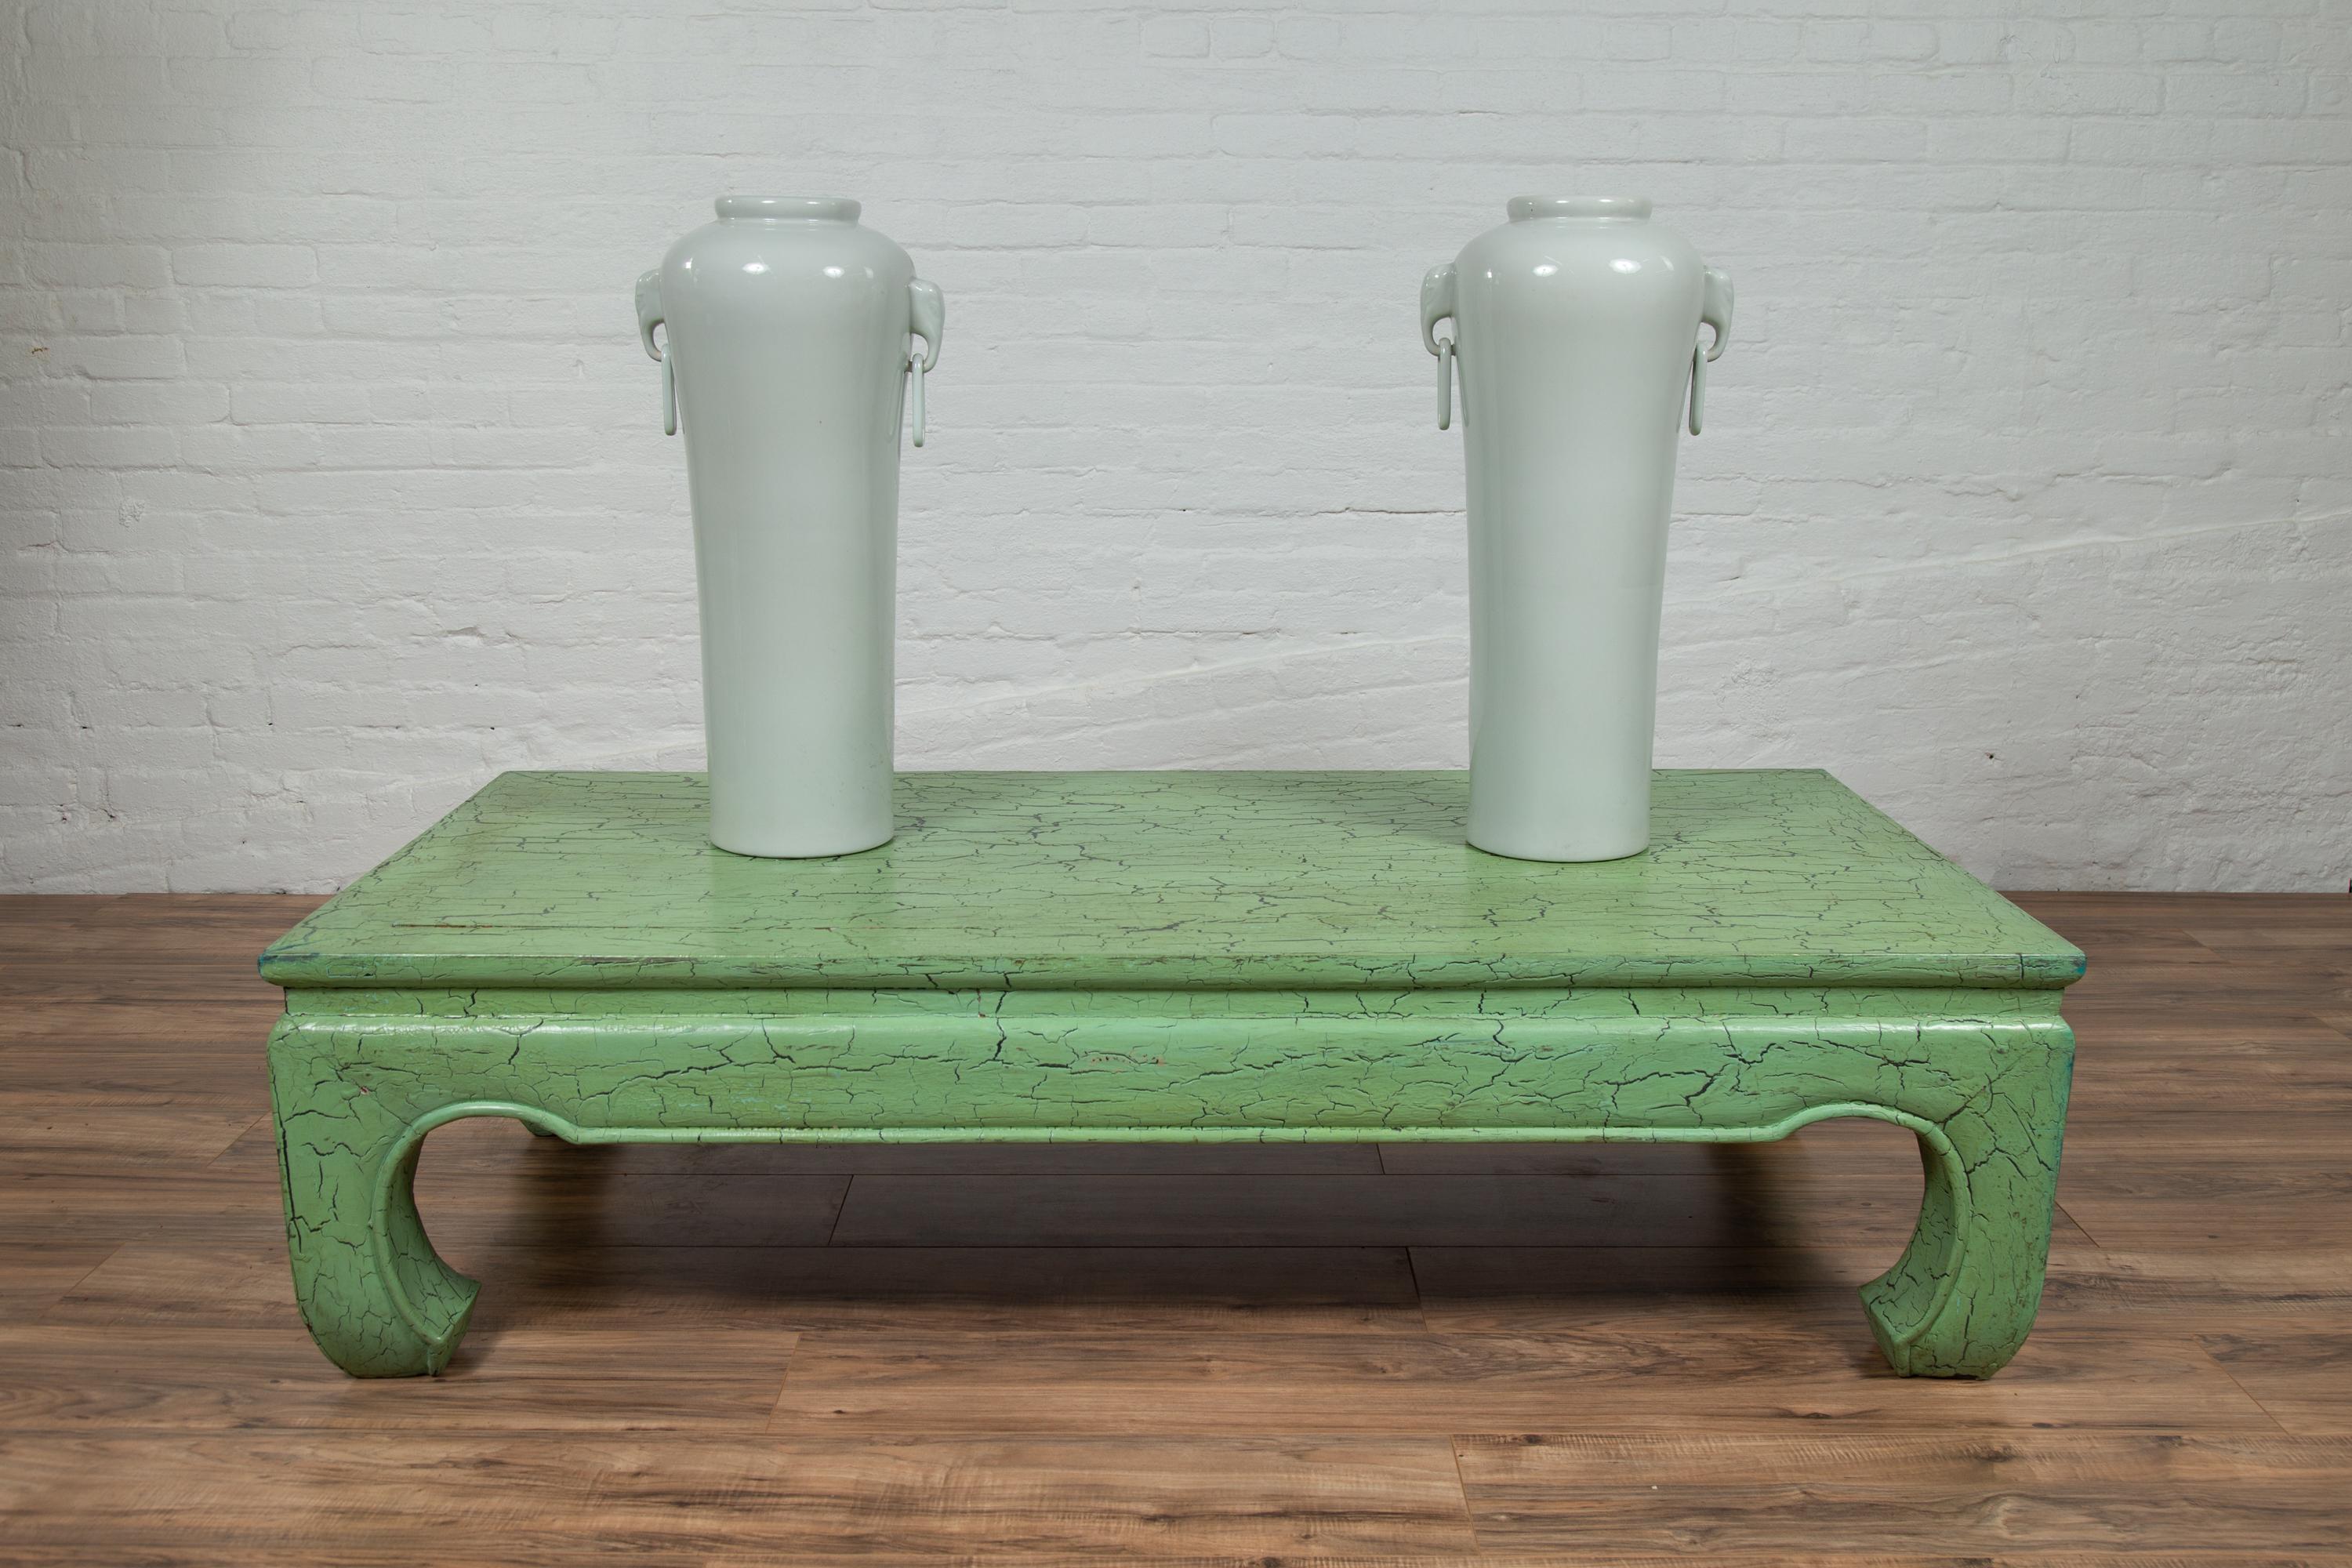 Painted Vintage Thai Teak Coffee Table with Green Crackled Finish and Chow Legs, 1950s